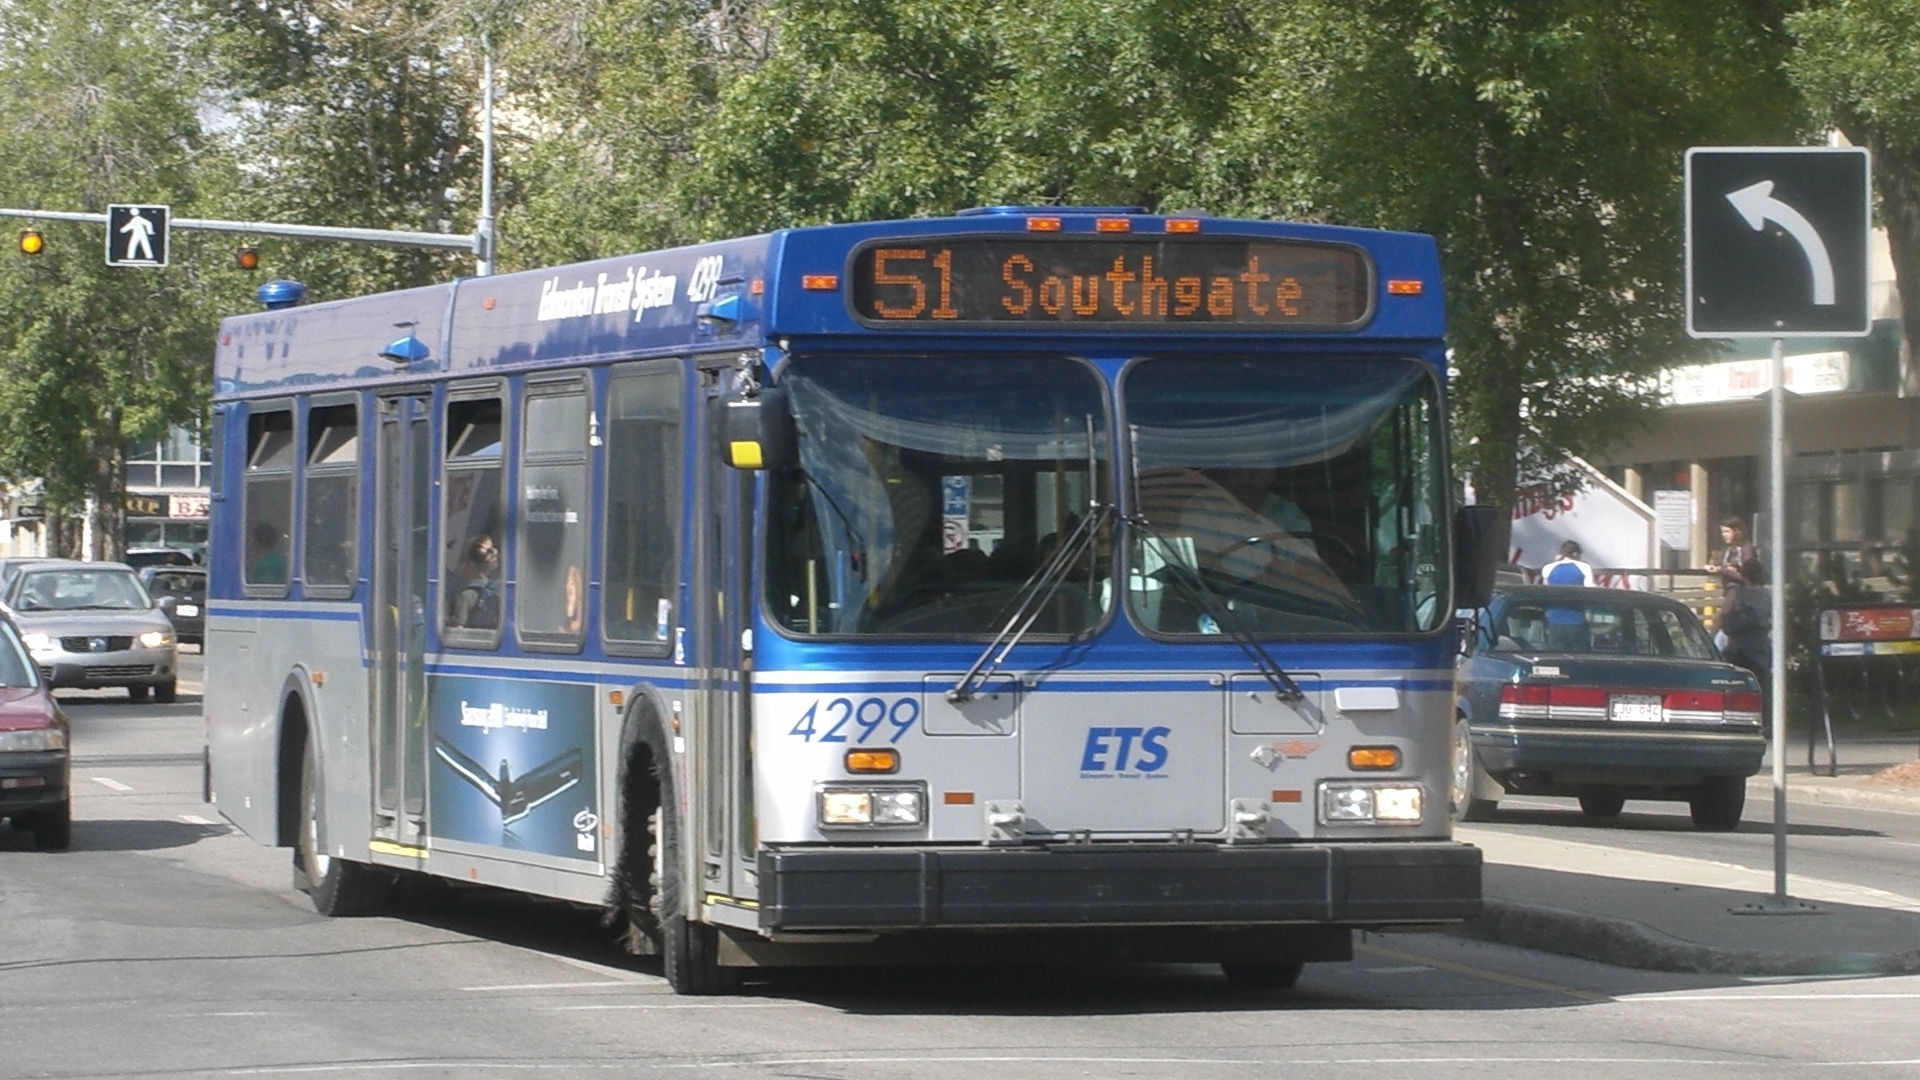 An Edmonton Transit System bus in white and blue livery